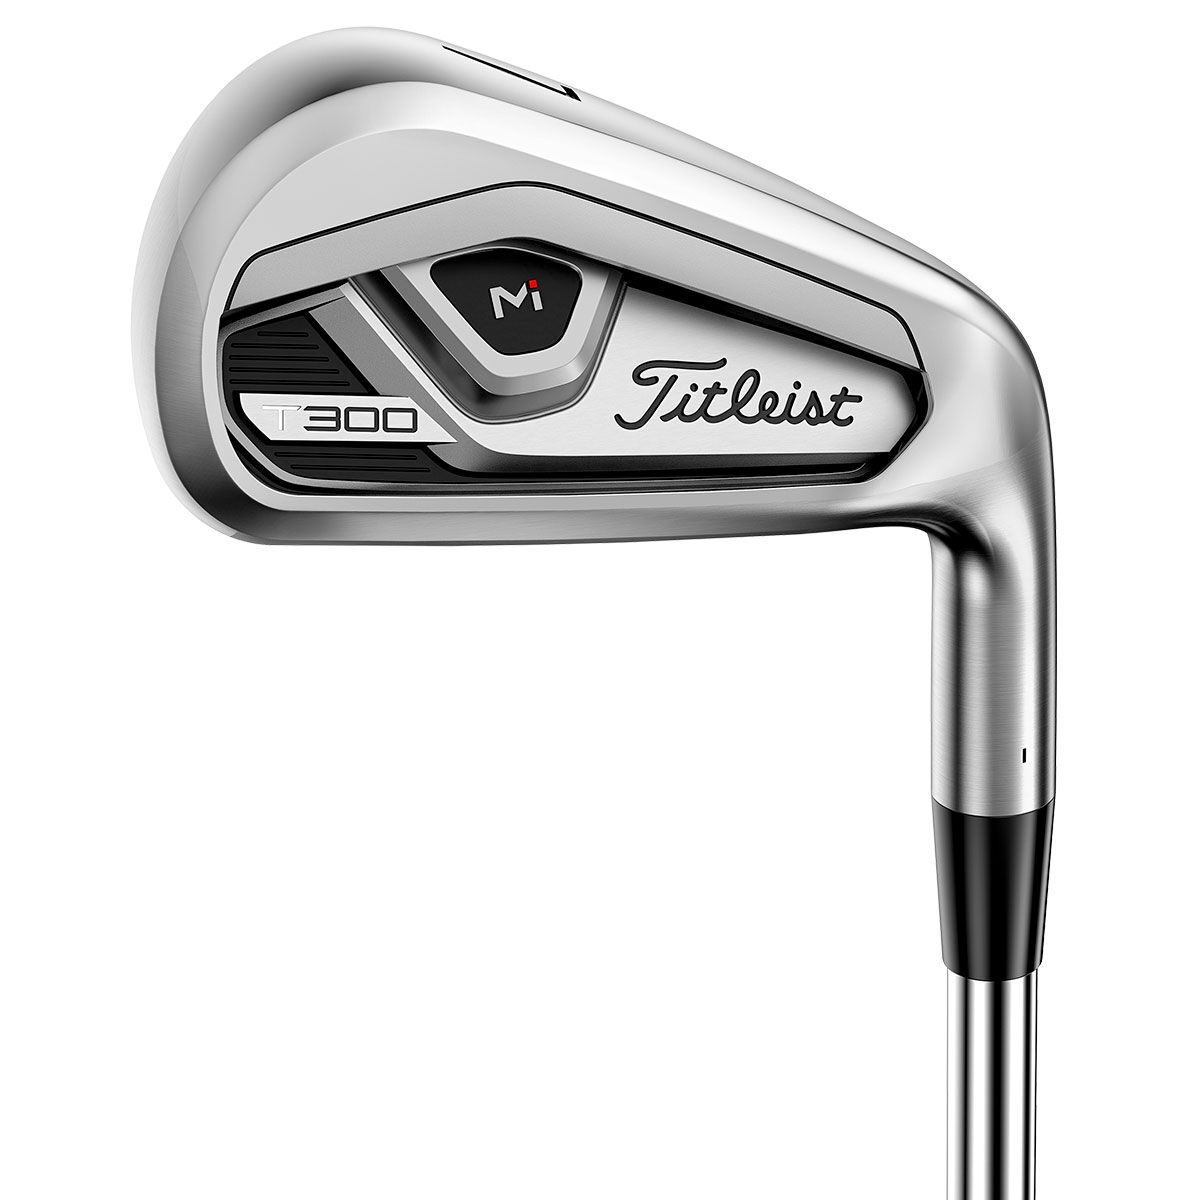 Titleist Silver and Black Printed T300 Graphite Golf Irons 2021, Womens, 5-Gw (7 Irons), Right Hand, Graphite, Lady Flex | American Golf, Size: 2000˚, 2000° von Titleist